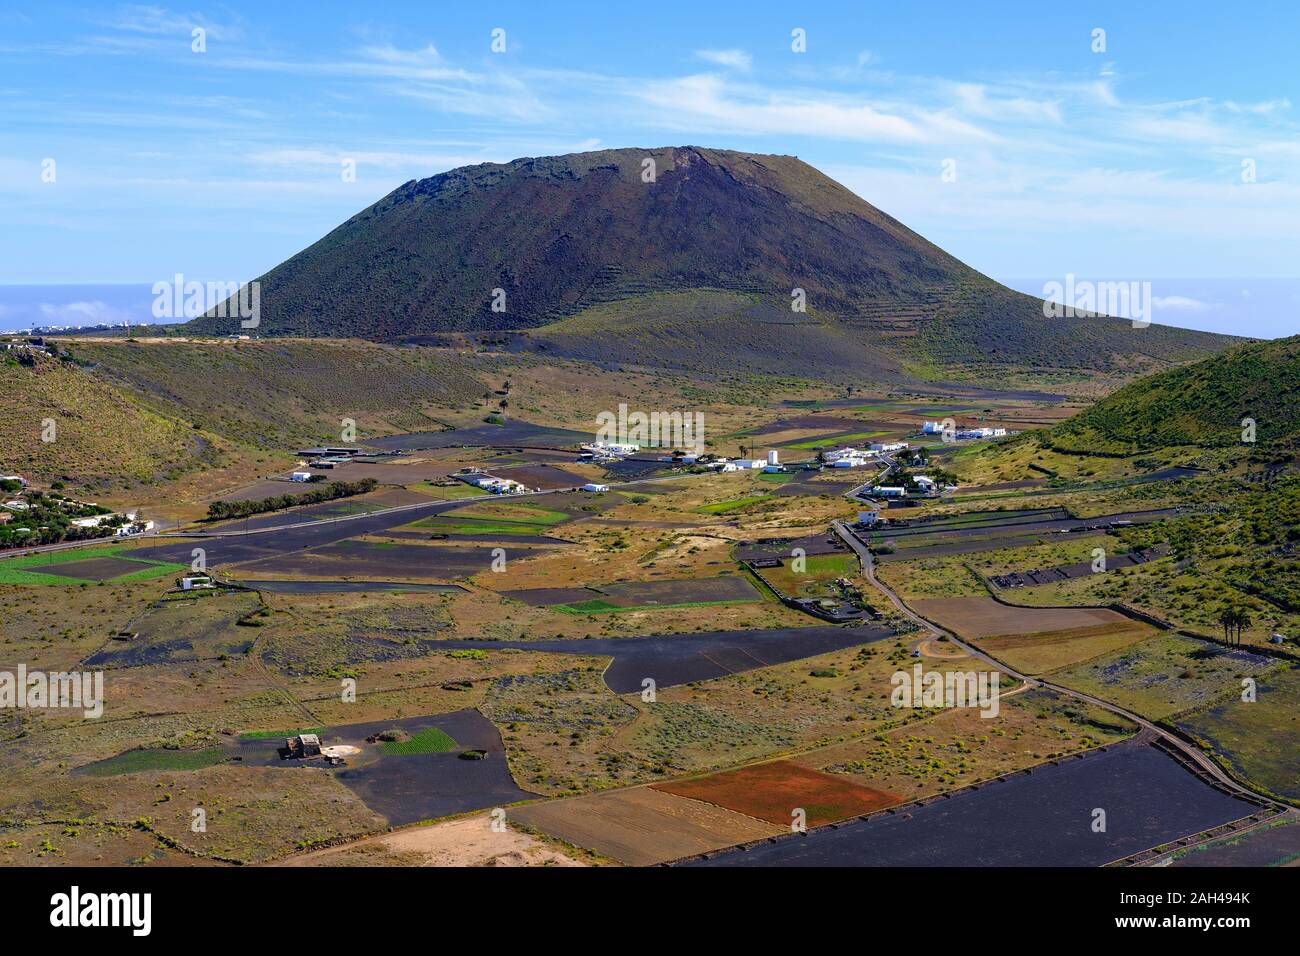 Spain, Canary Islands, Guinate, Fields in front of rural village with Monte Corona volcano looming in background Stock Photo